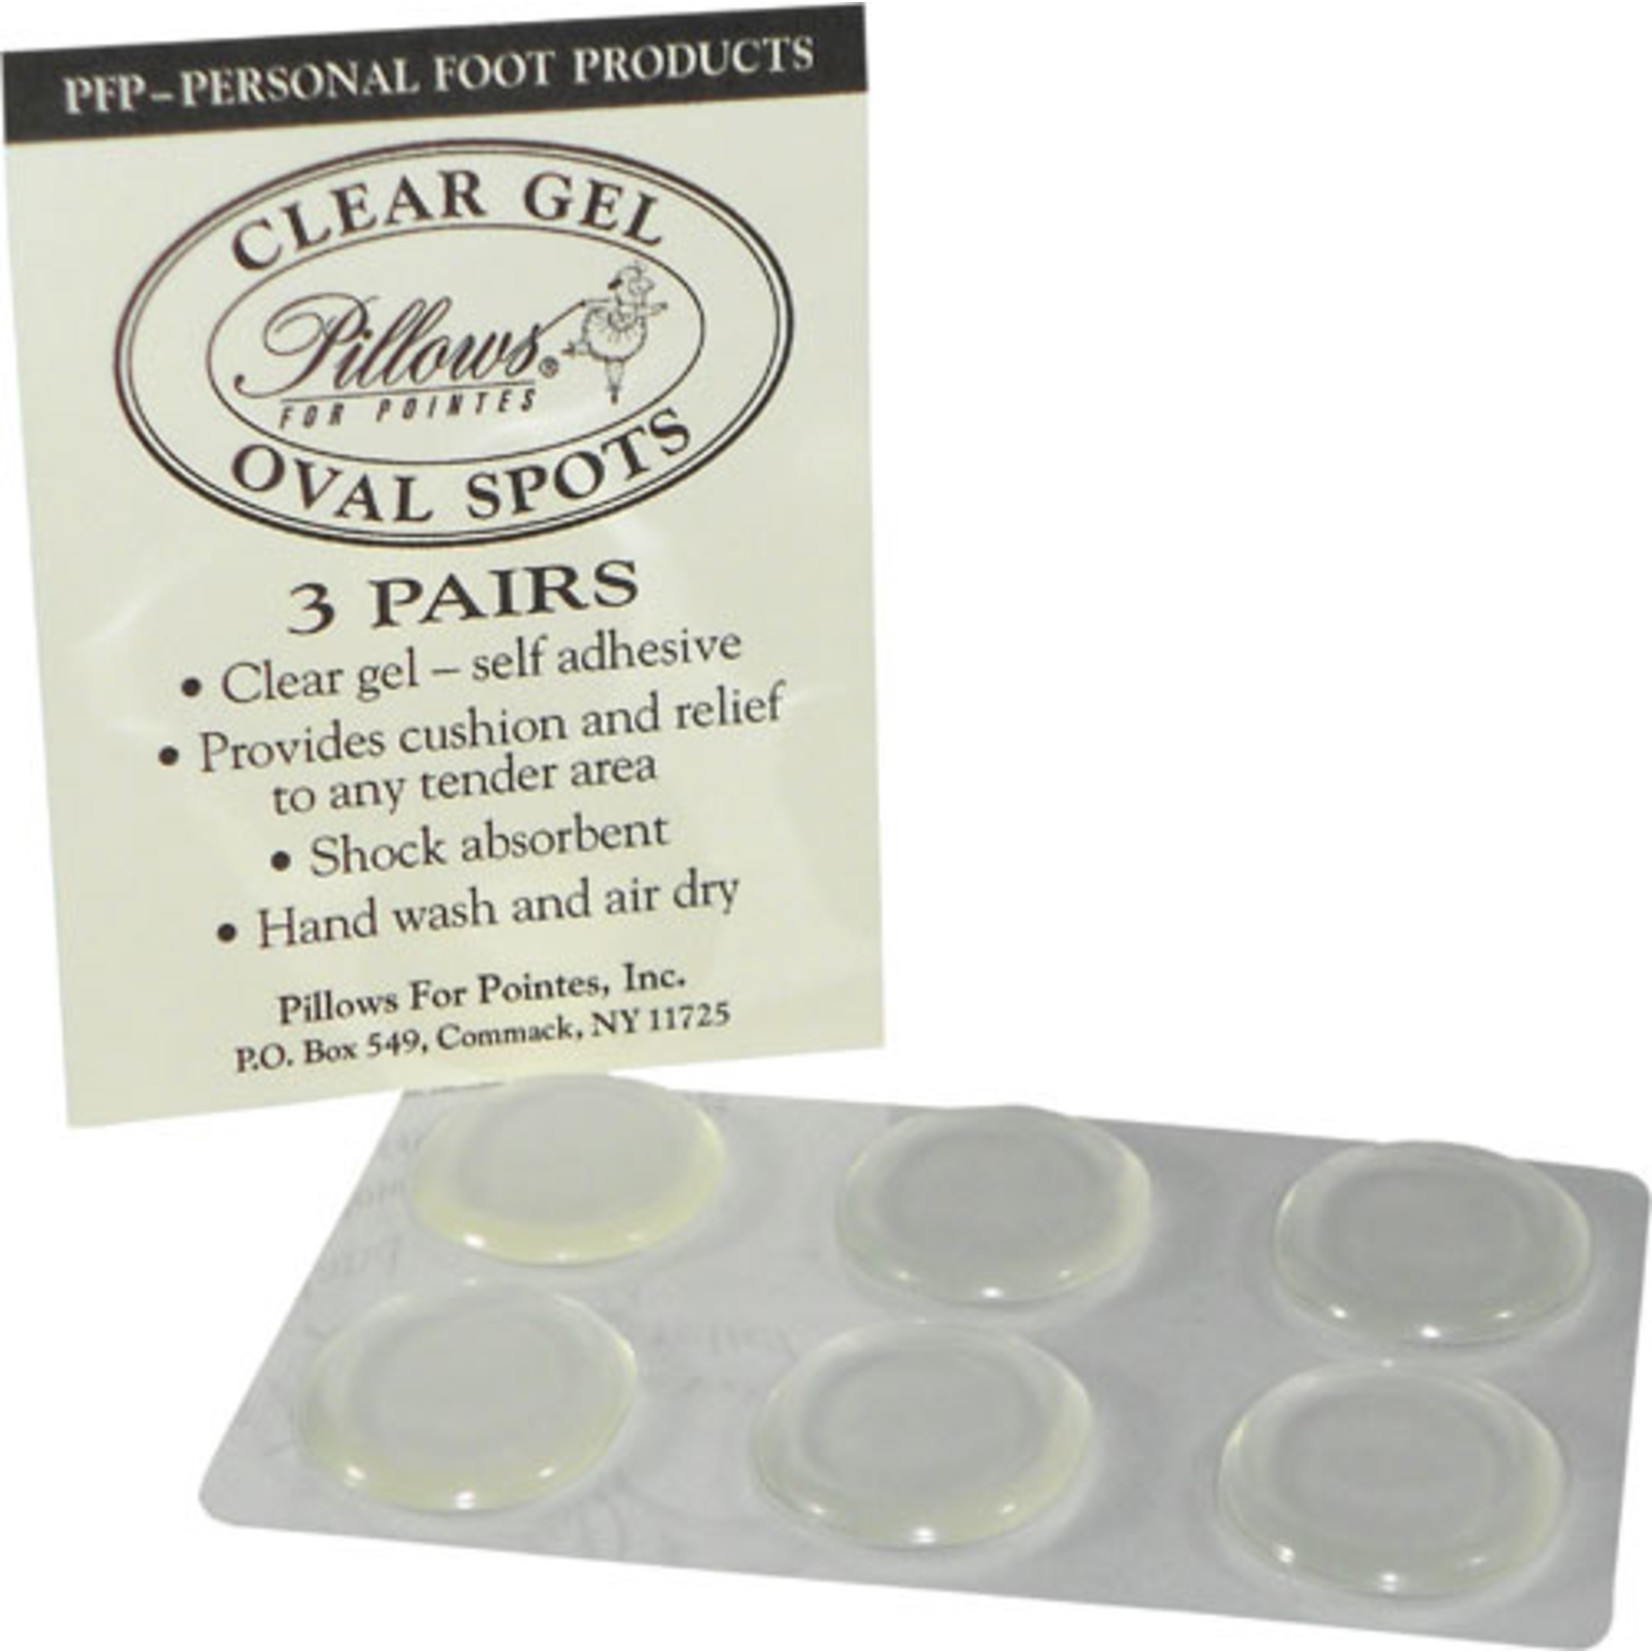 PILLOWS FOR POINTES PFP12 GEL OVAL SPOTS